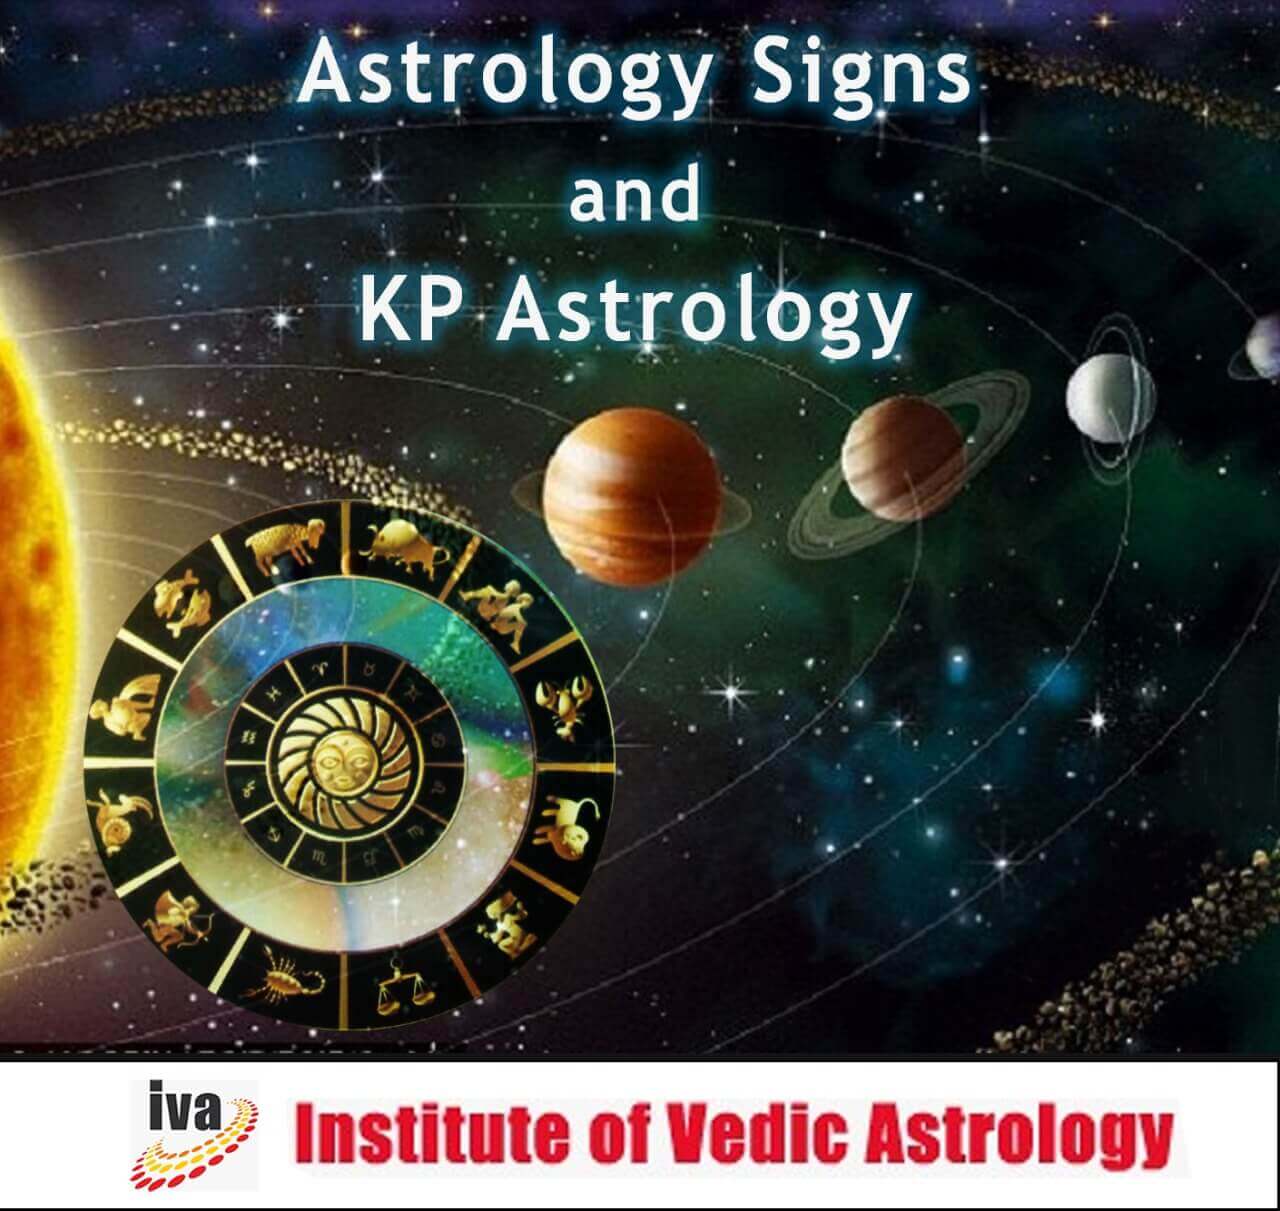 Astrology signs and KP Astrology